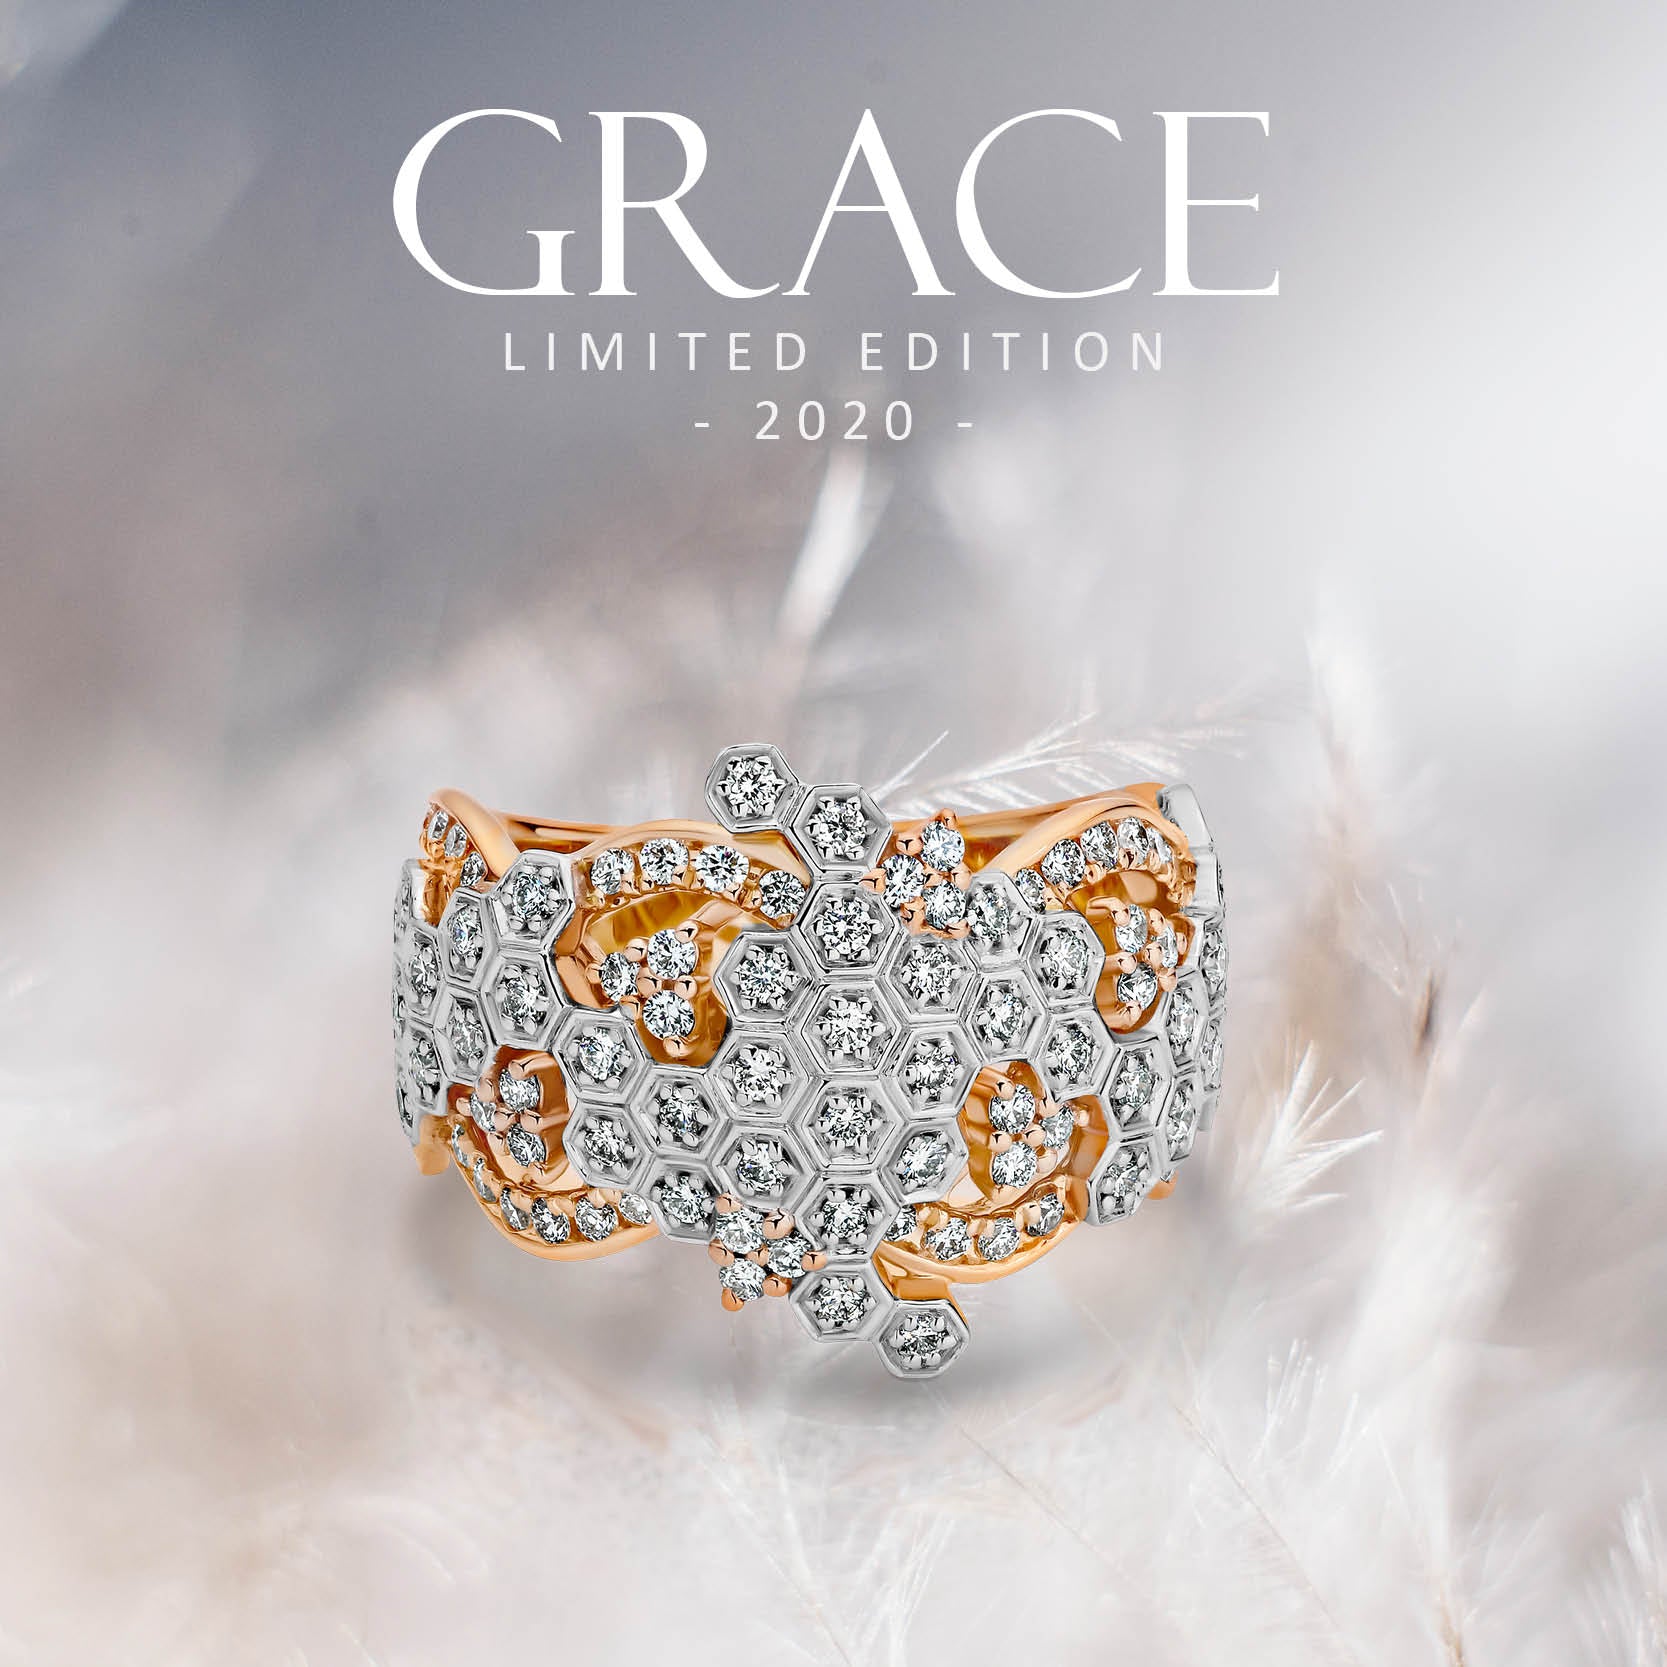 The Grace Ring - Limited Edition